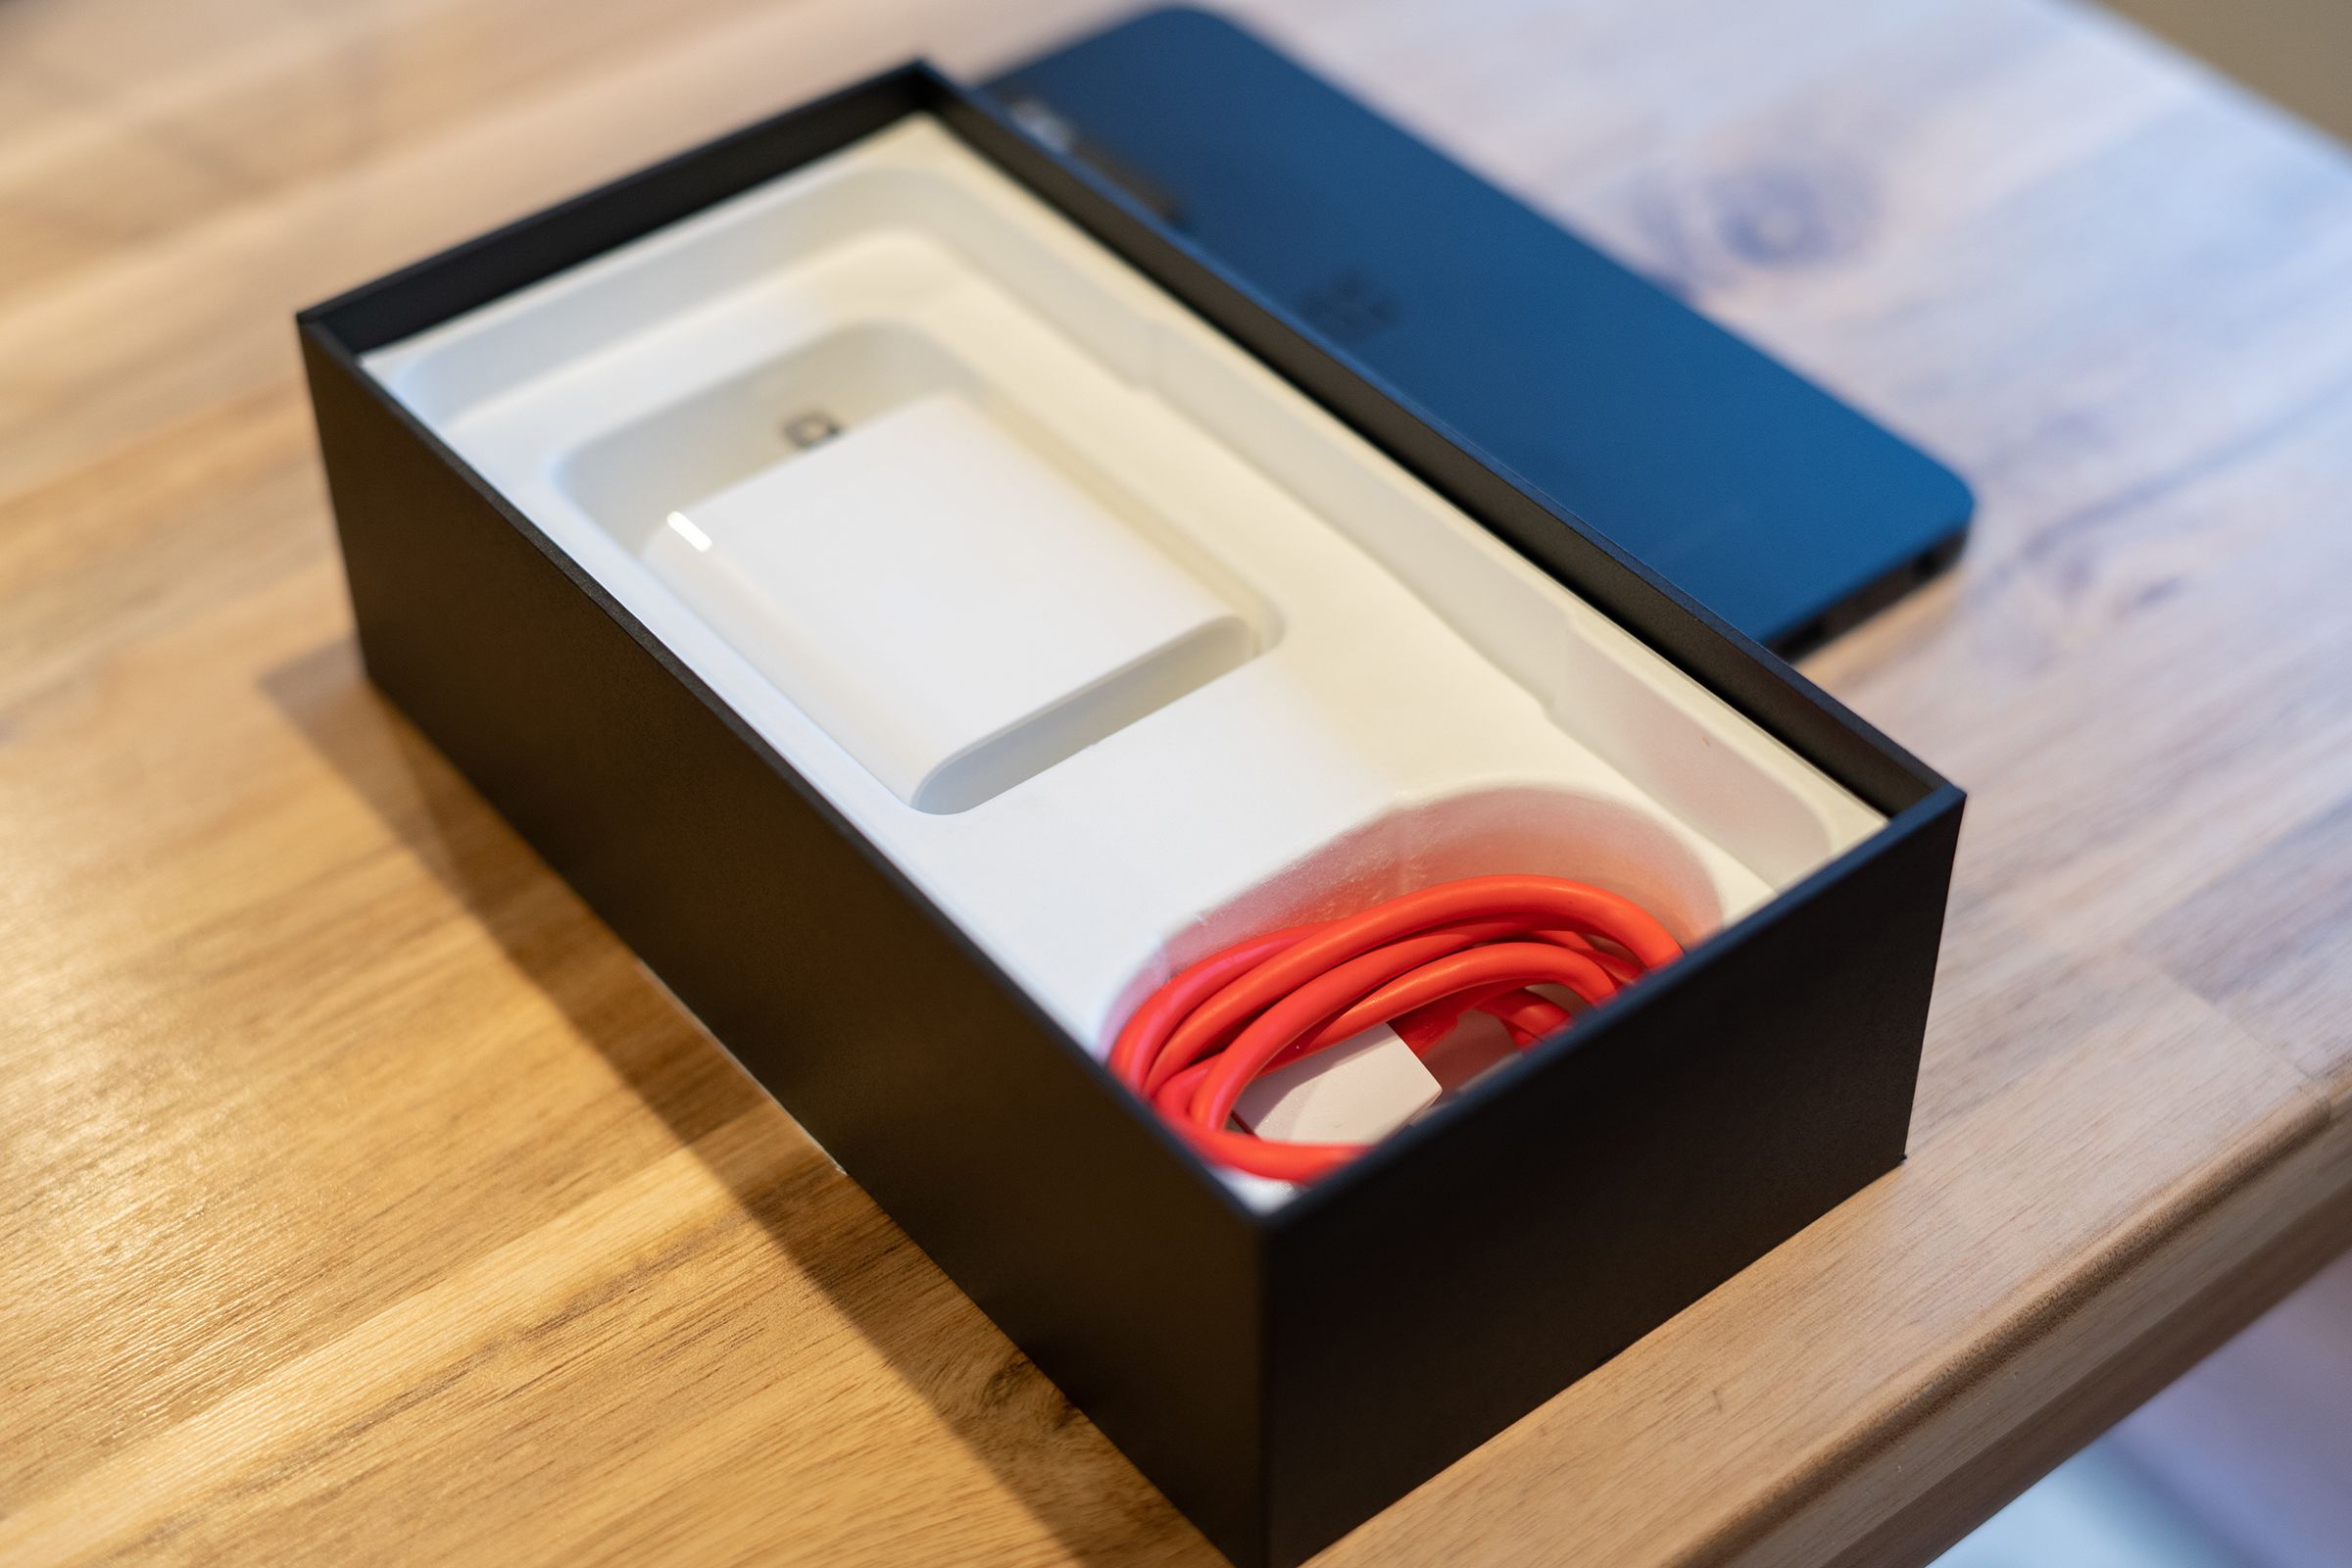 Charger and cable shown in a retail box with no lid